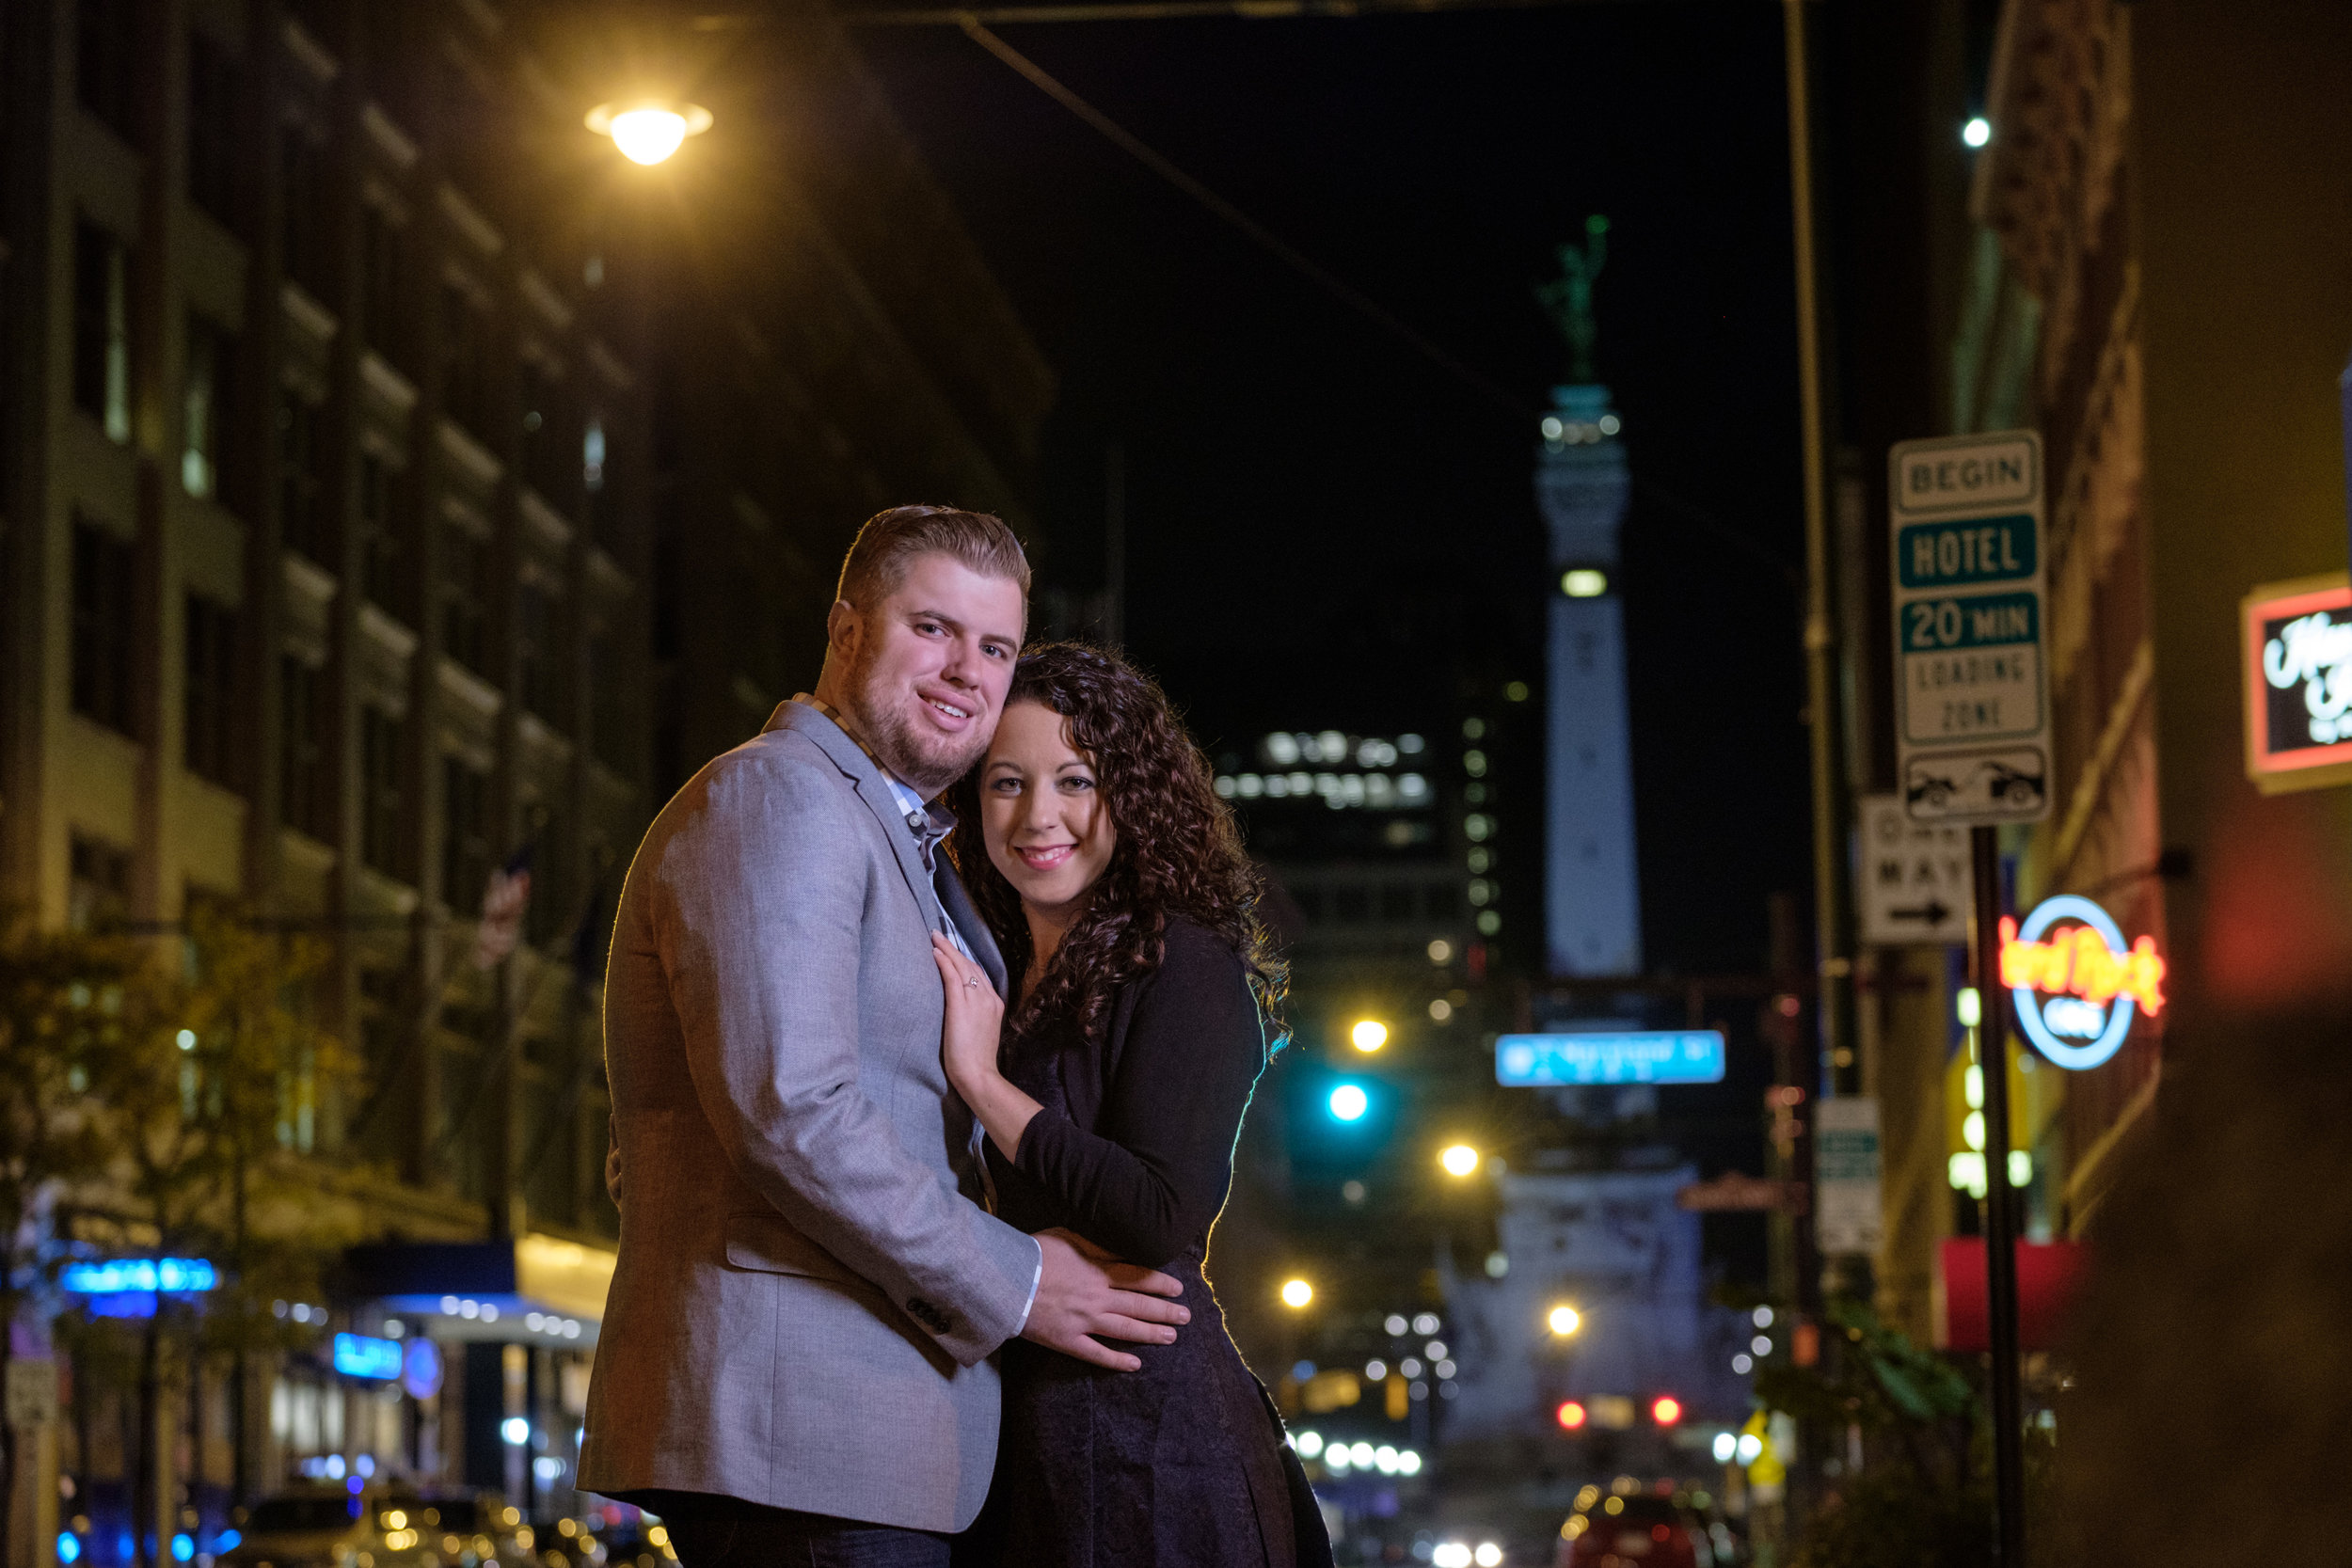 Downtown-Indianapolis-night-engagement-pictures-24.jpg